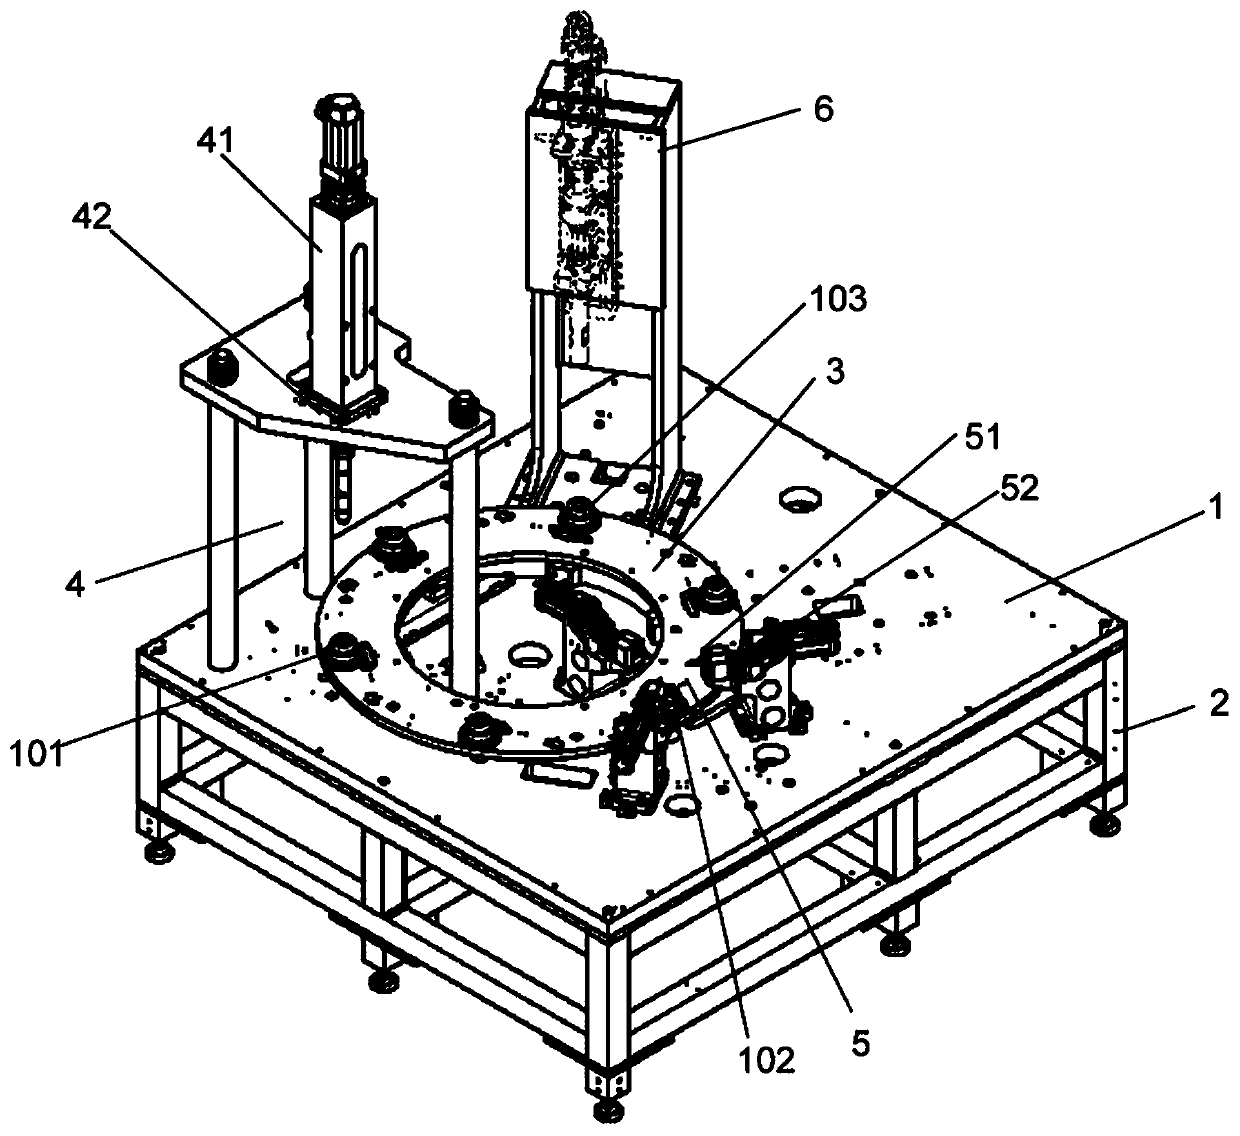 Multi-station assembling equipment for assembling vehicle components